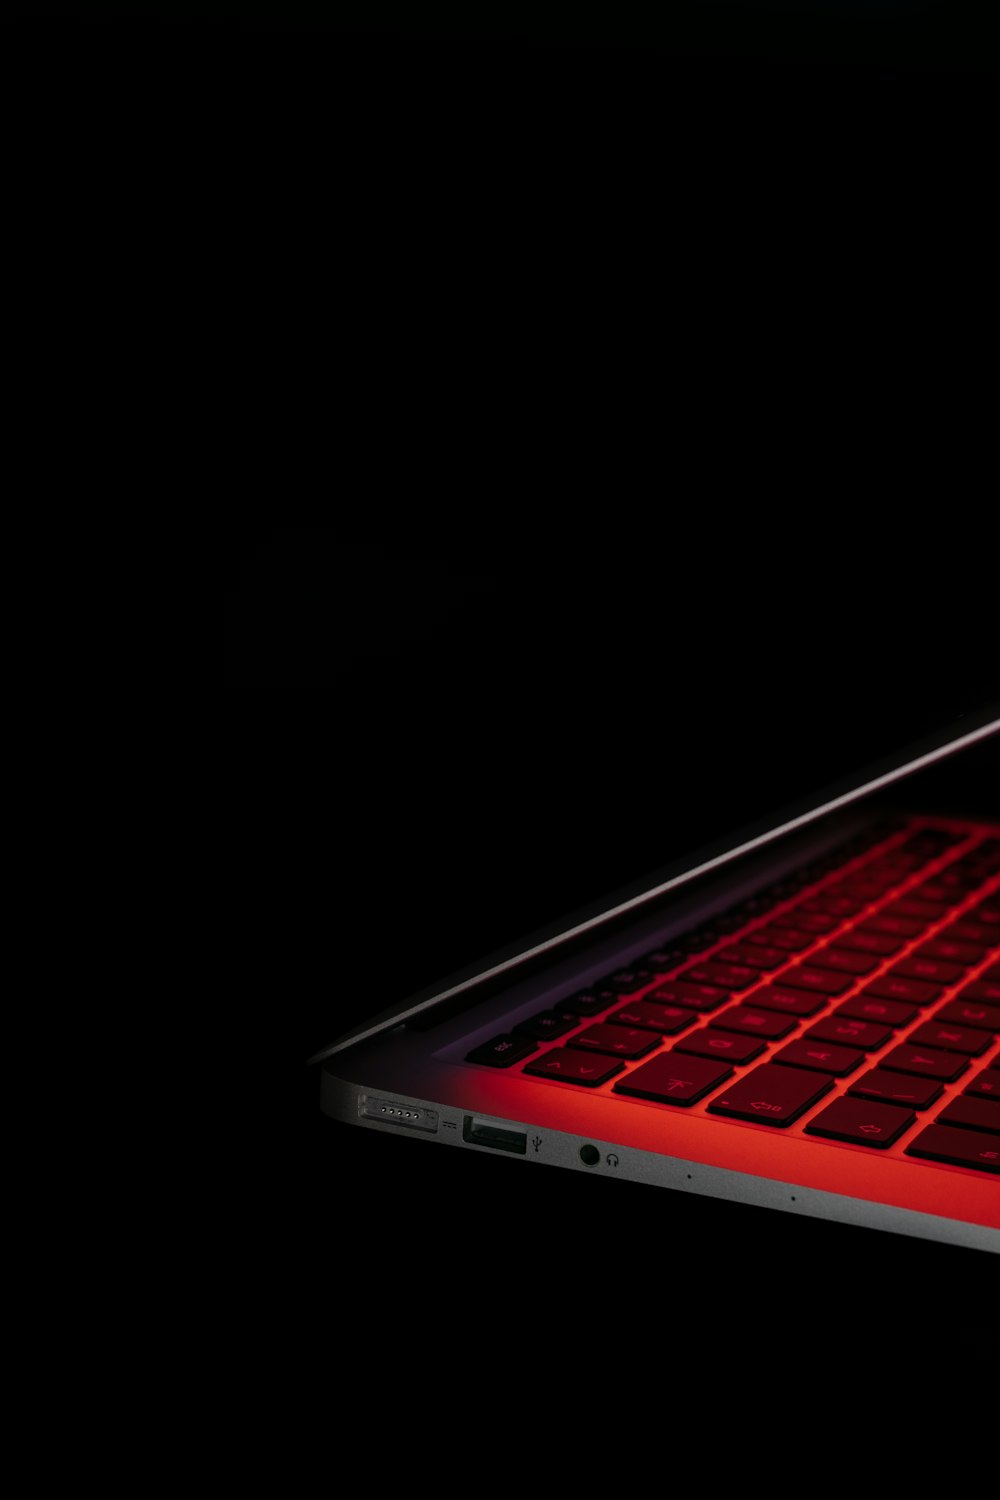 black and red laptop computer